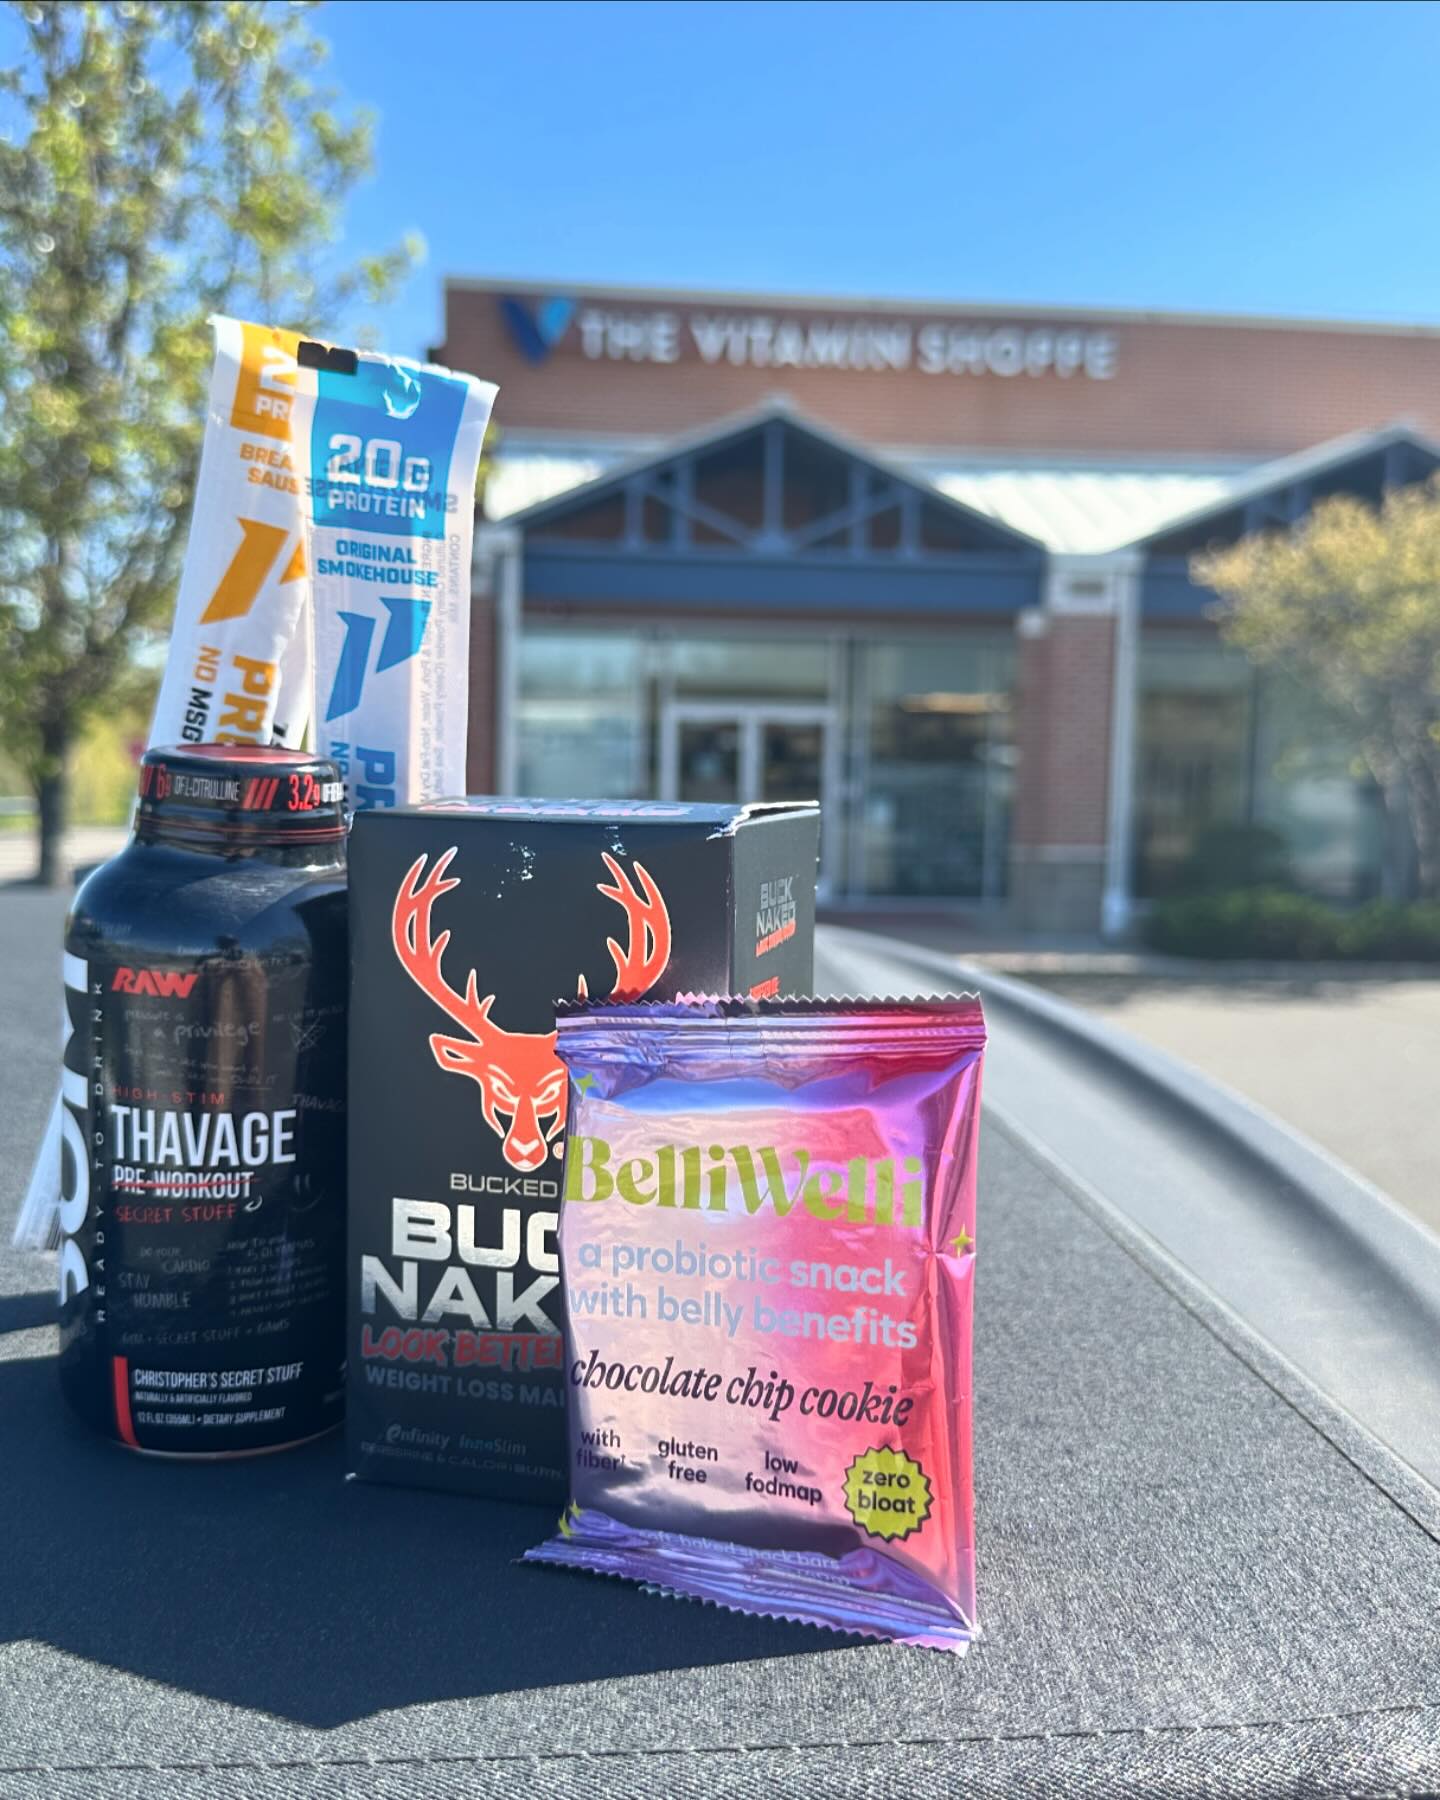 Supplement and Snack Haul: Stocked up on the good stuff from @vitaminshoppe and @target!  Swipe through to see what we picked up: